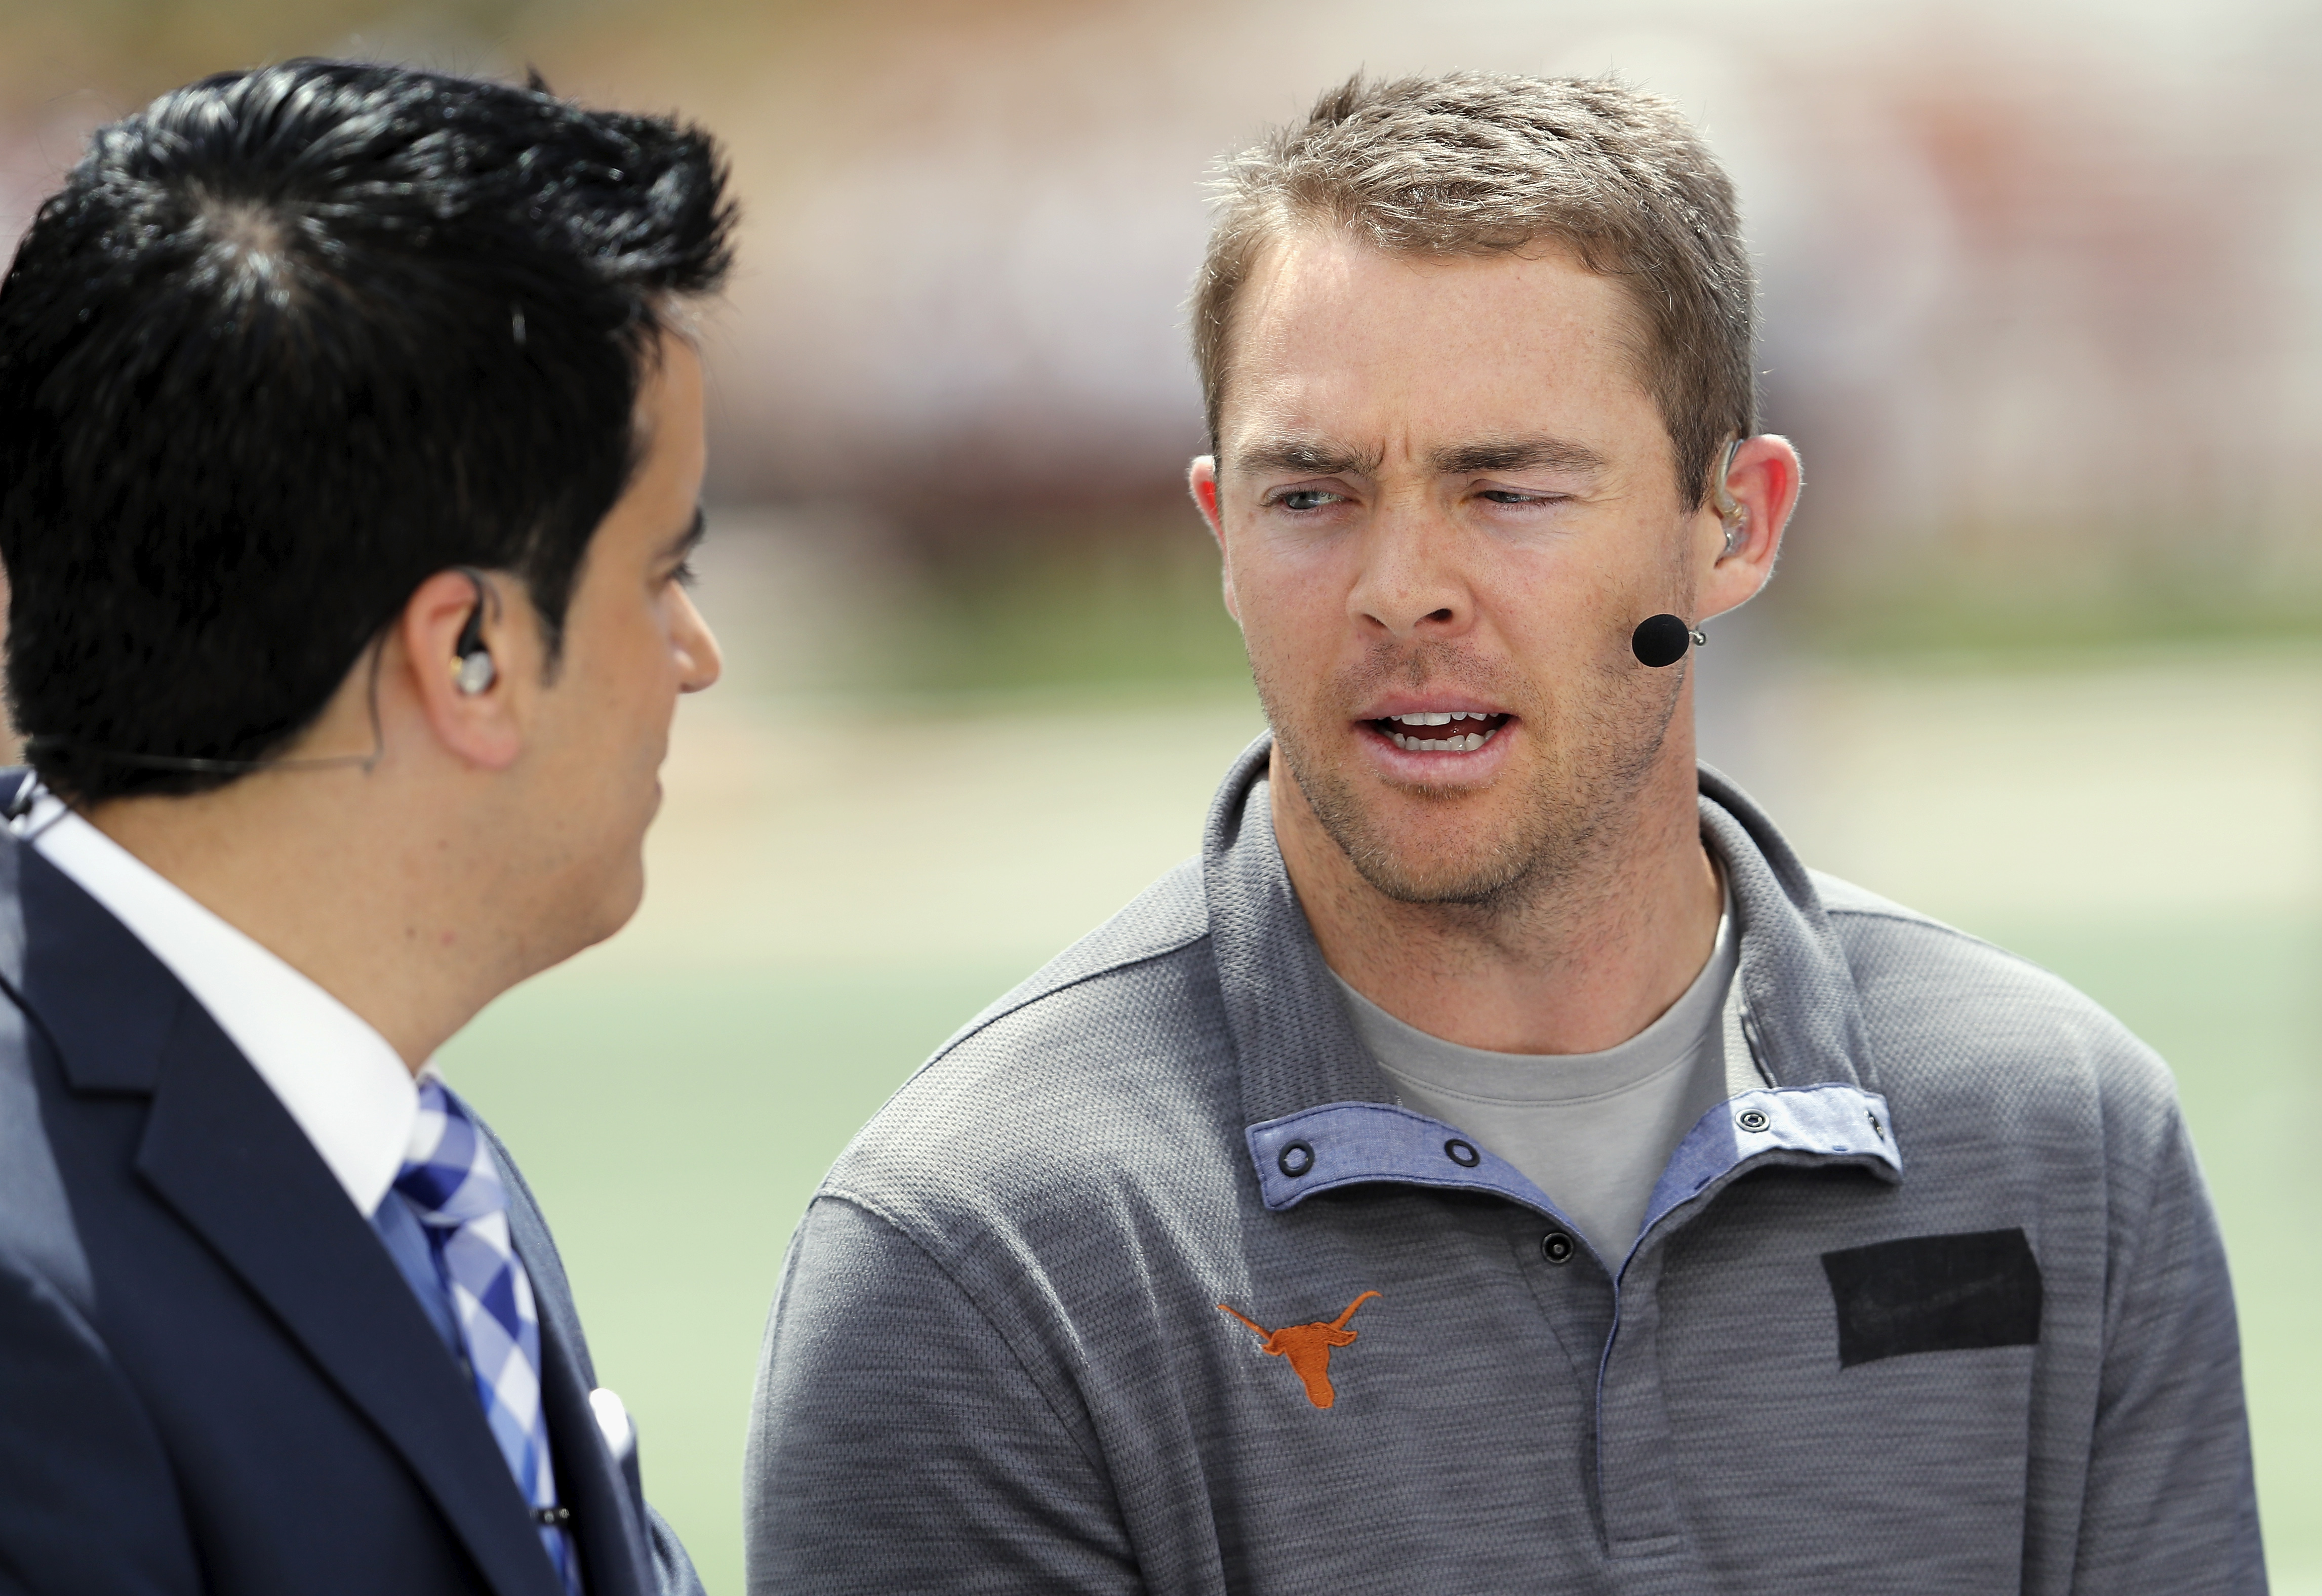 He looks like his dog died': Former Longhorn QB great Colt McCoy dons Tech  outfit after Texas' loss to Red Raiders